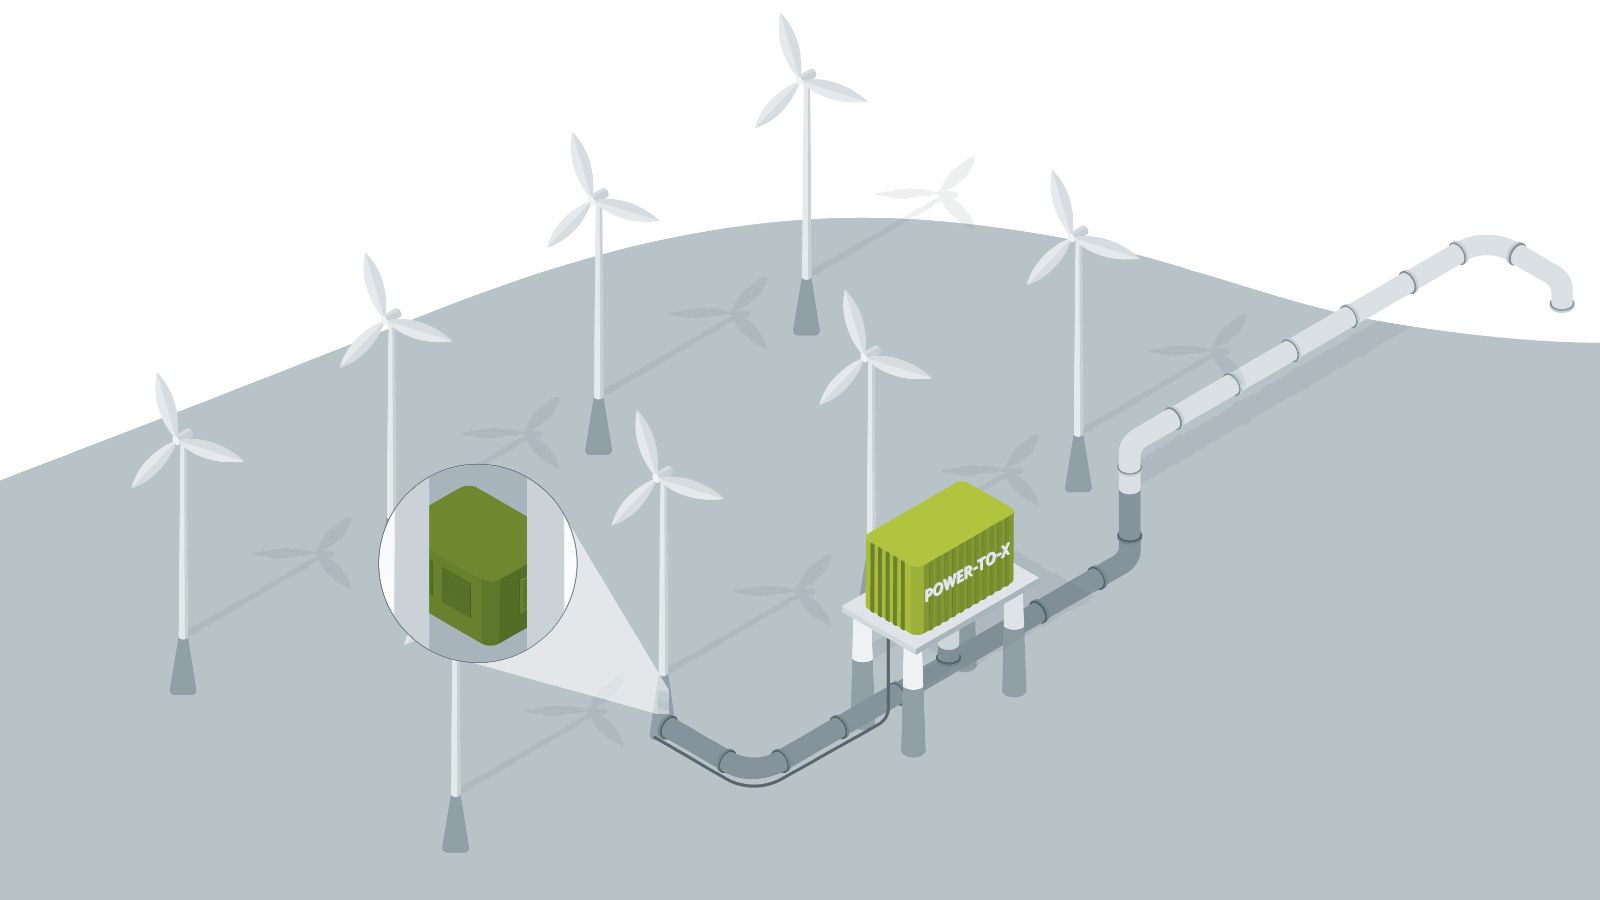 The picture shows a wind turbine in which an electrolyzer produces green hydrogen and power-to-X products. 